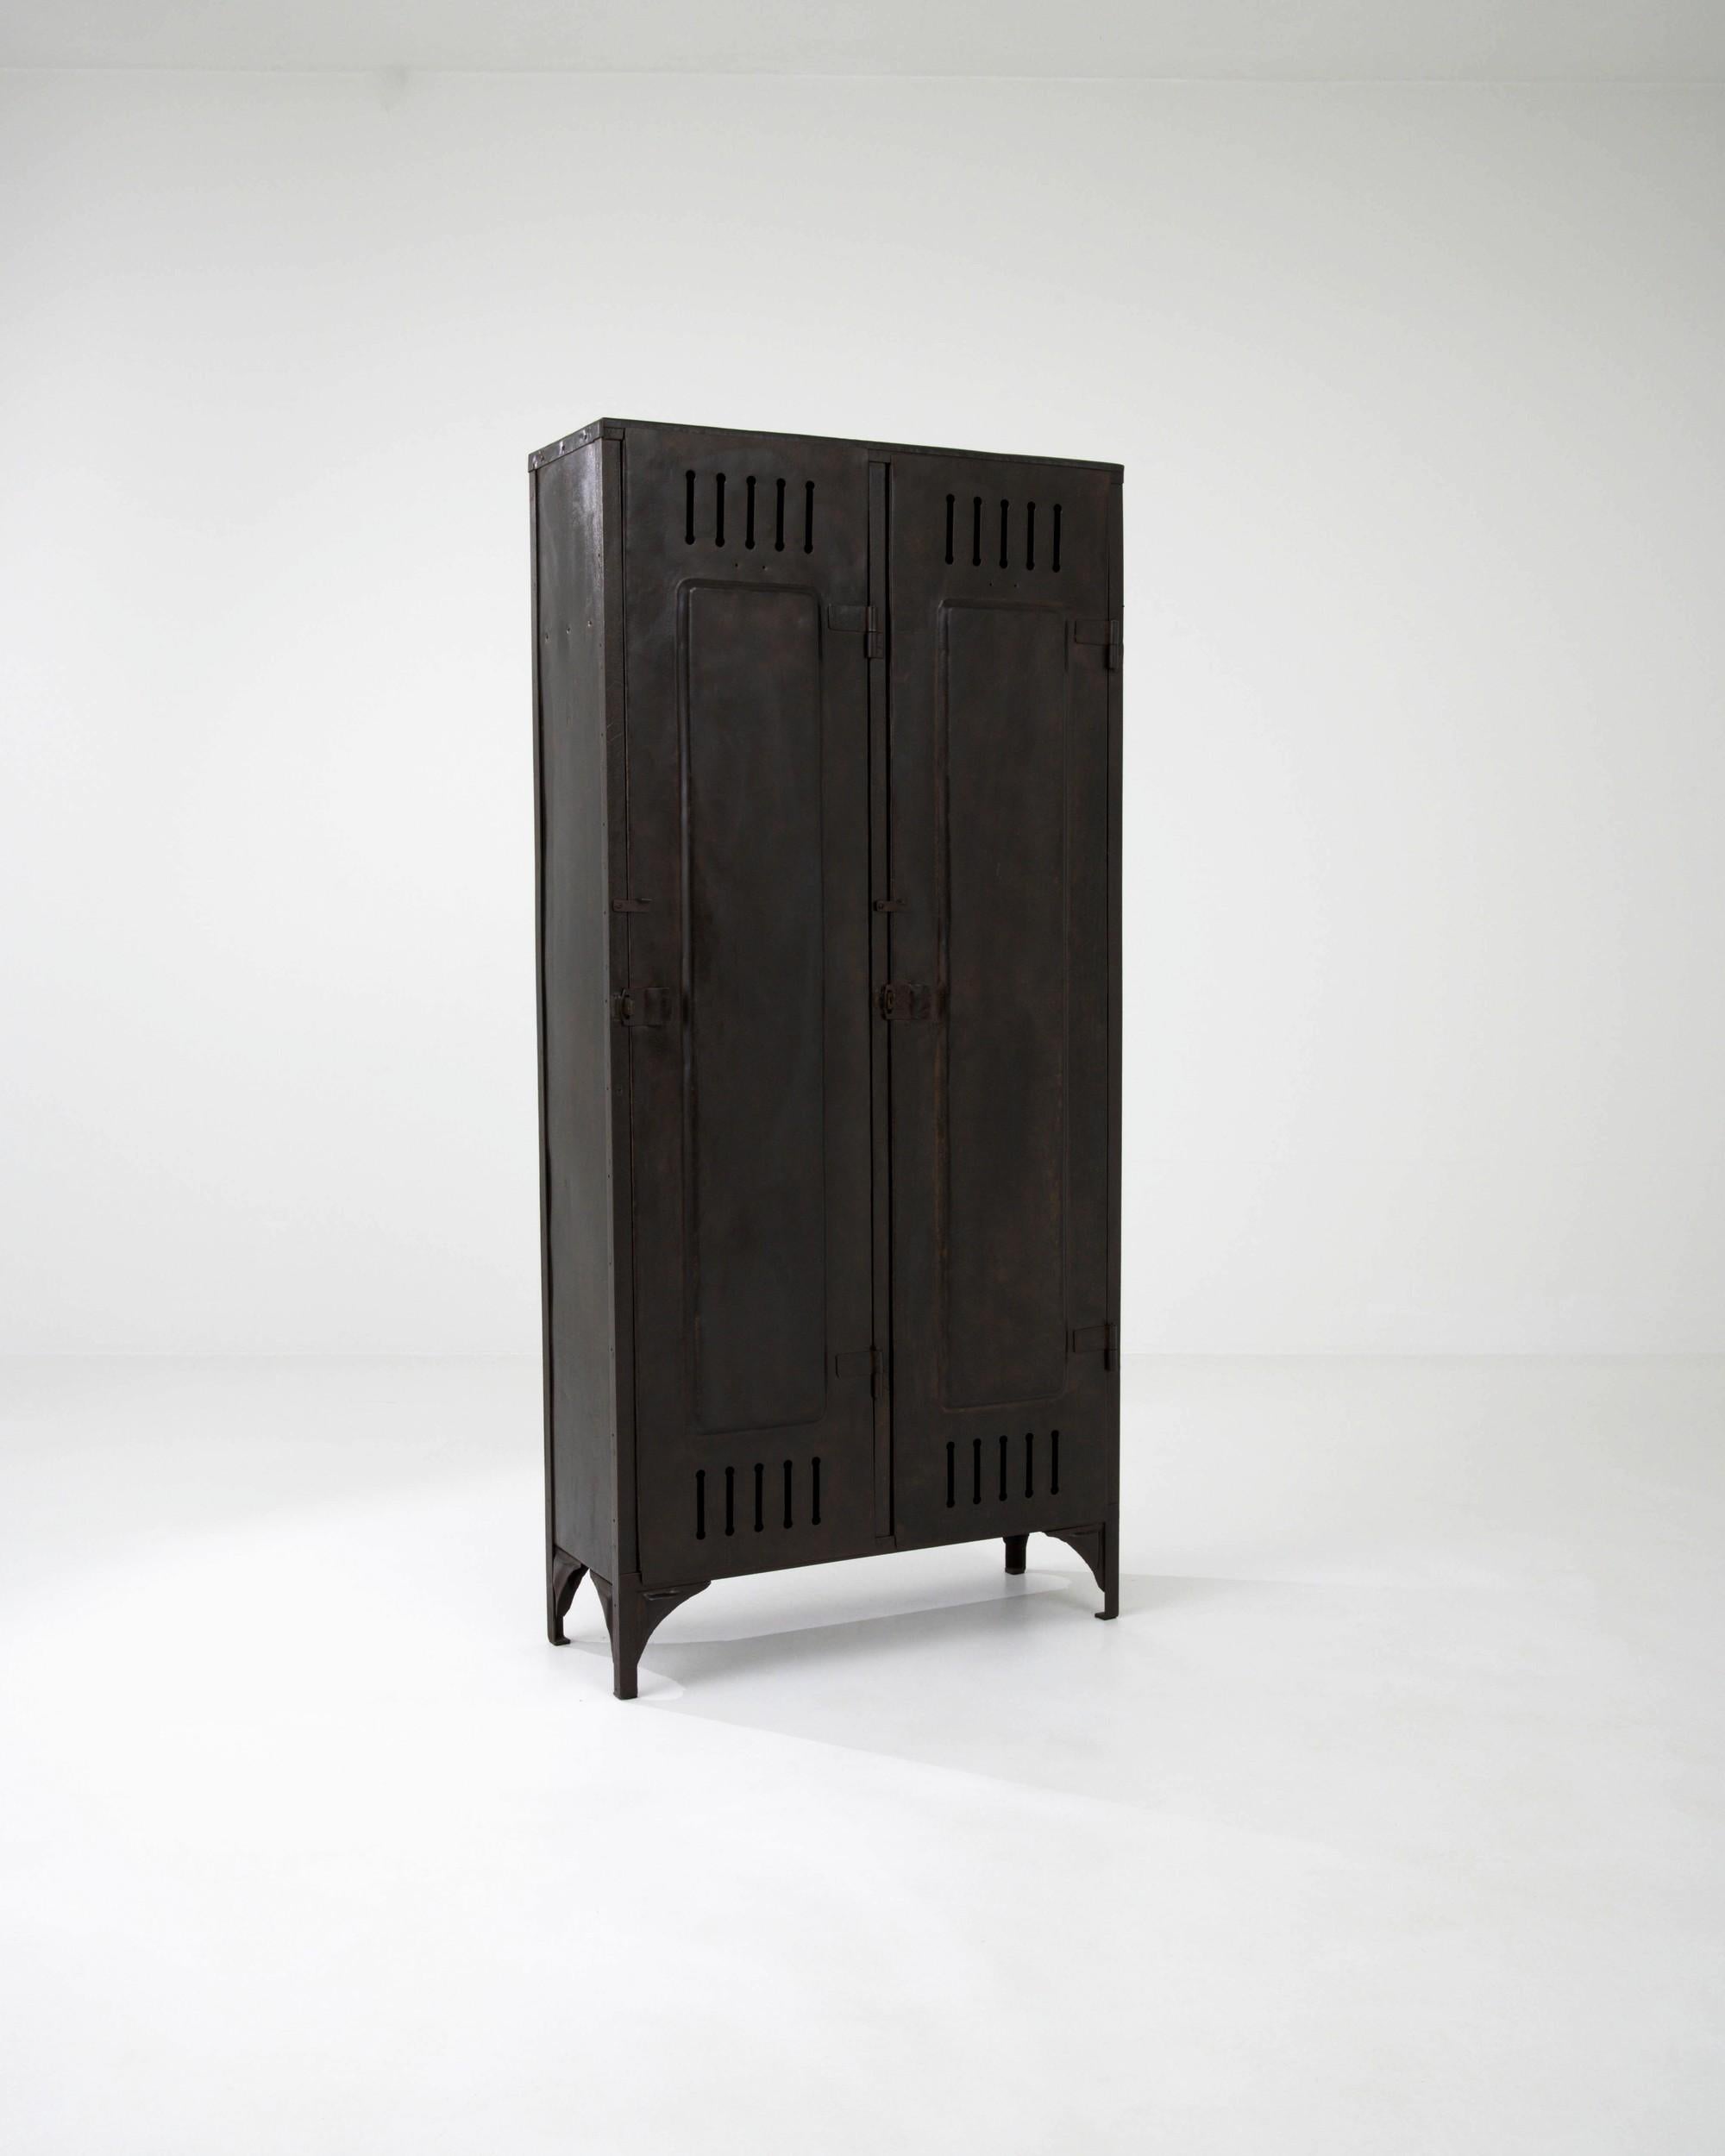 Characterized by the utilitarian aesthetic of the no-frills industrial design from the early 20th century, this 1900s French cabinet places an emphasis on practicality. It features two elongated, rectangular doors with simple locks and ventilation